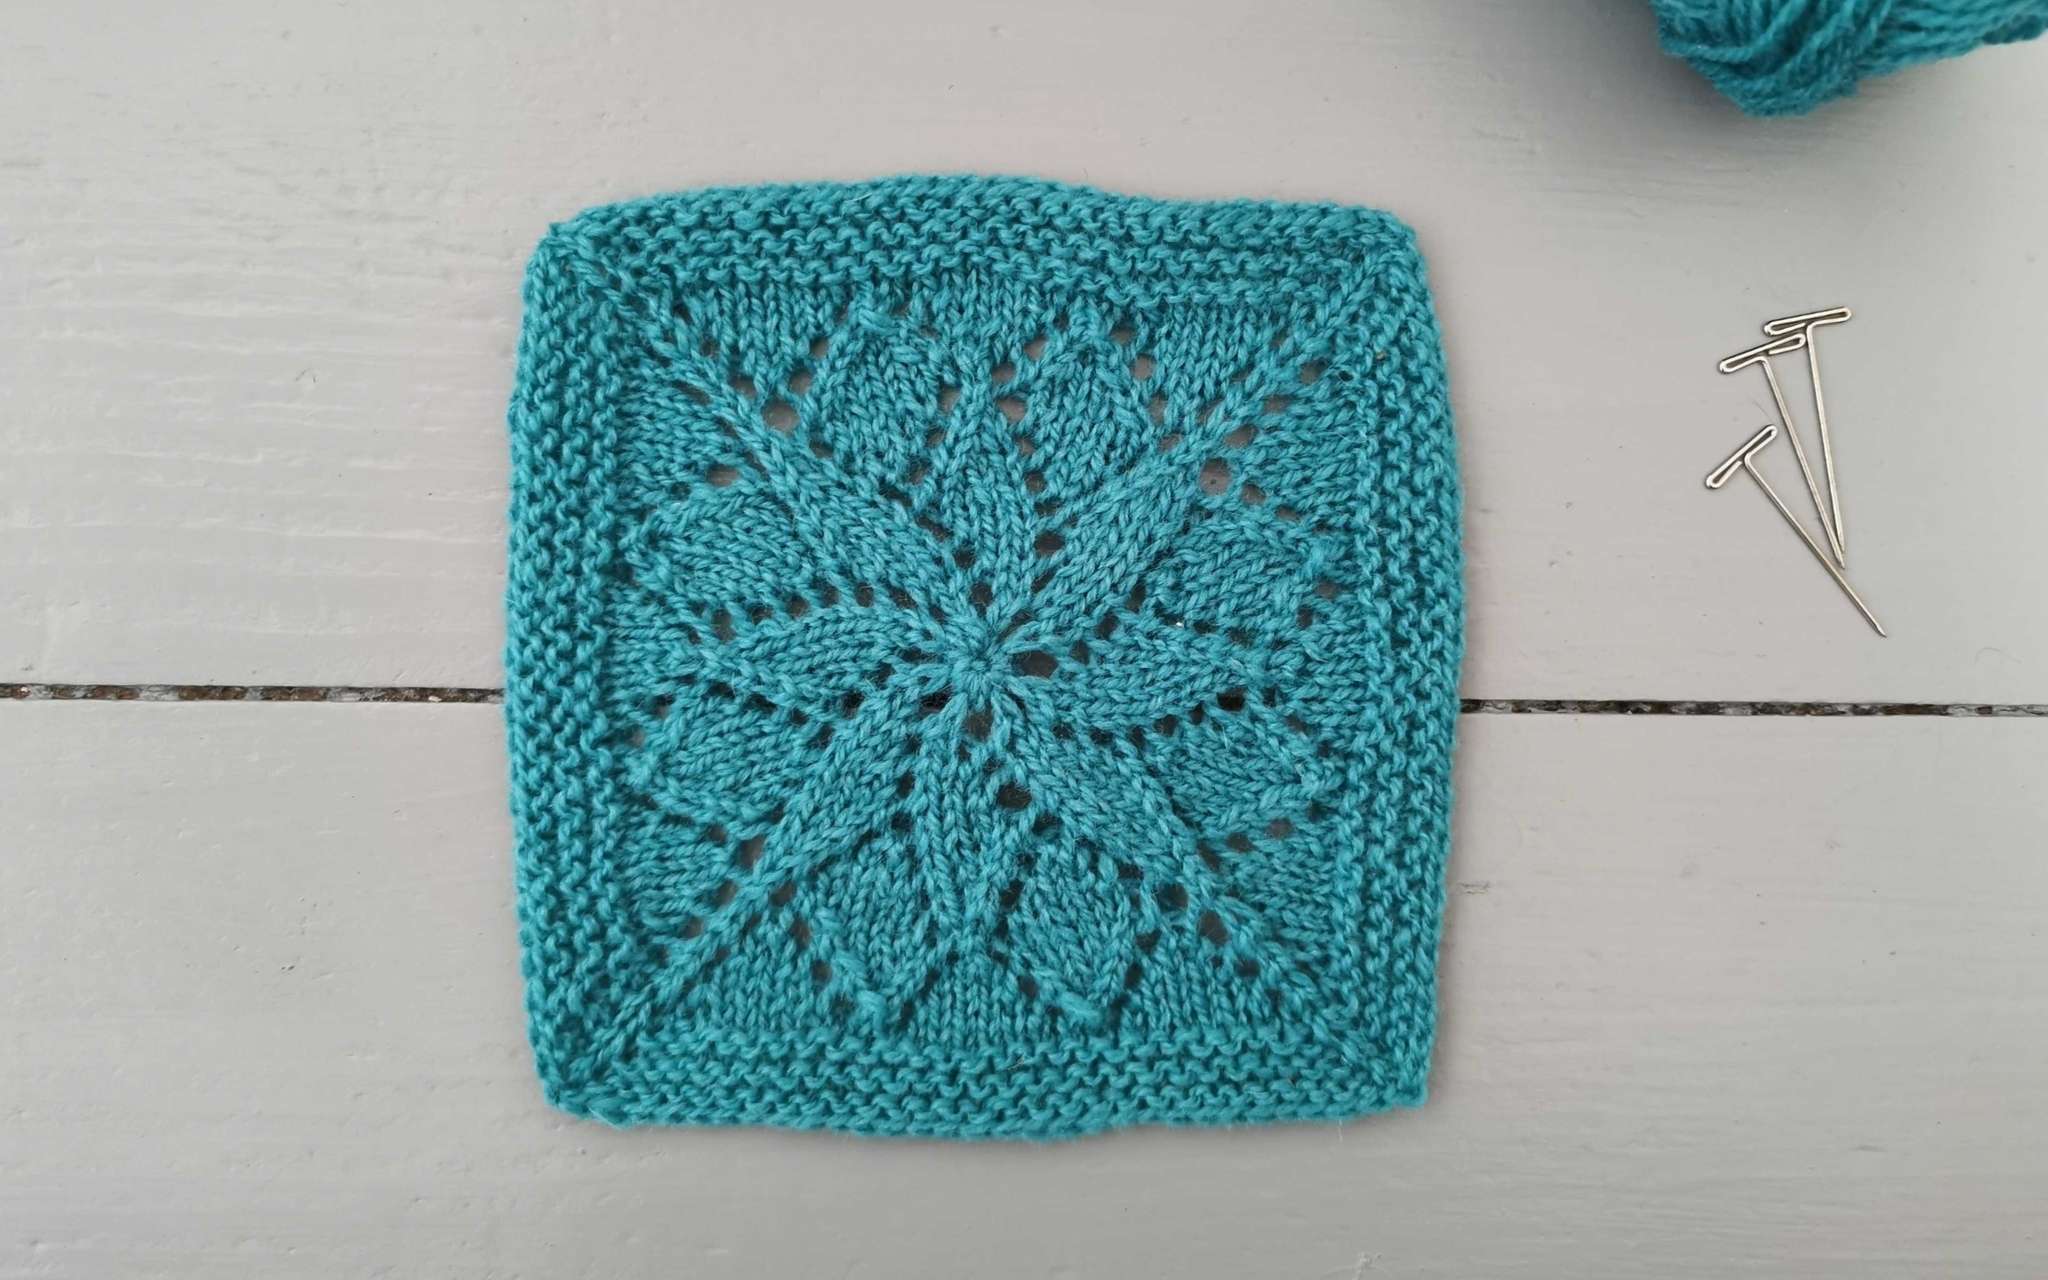 a square lace swatch of knitting, with three t-pins to the right and a glimpse of the ball of yarn used.